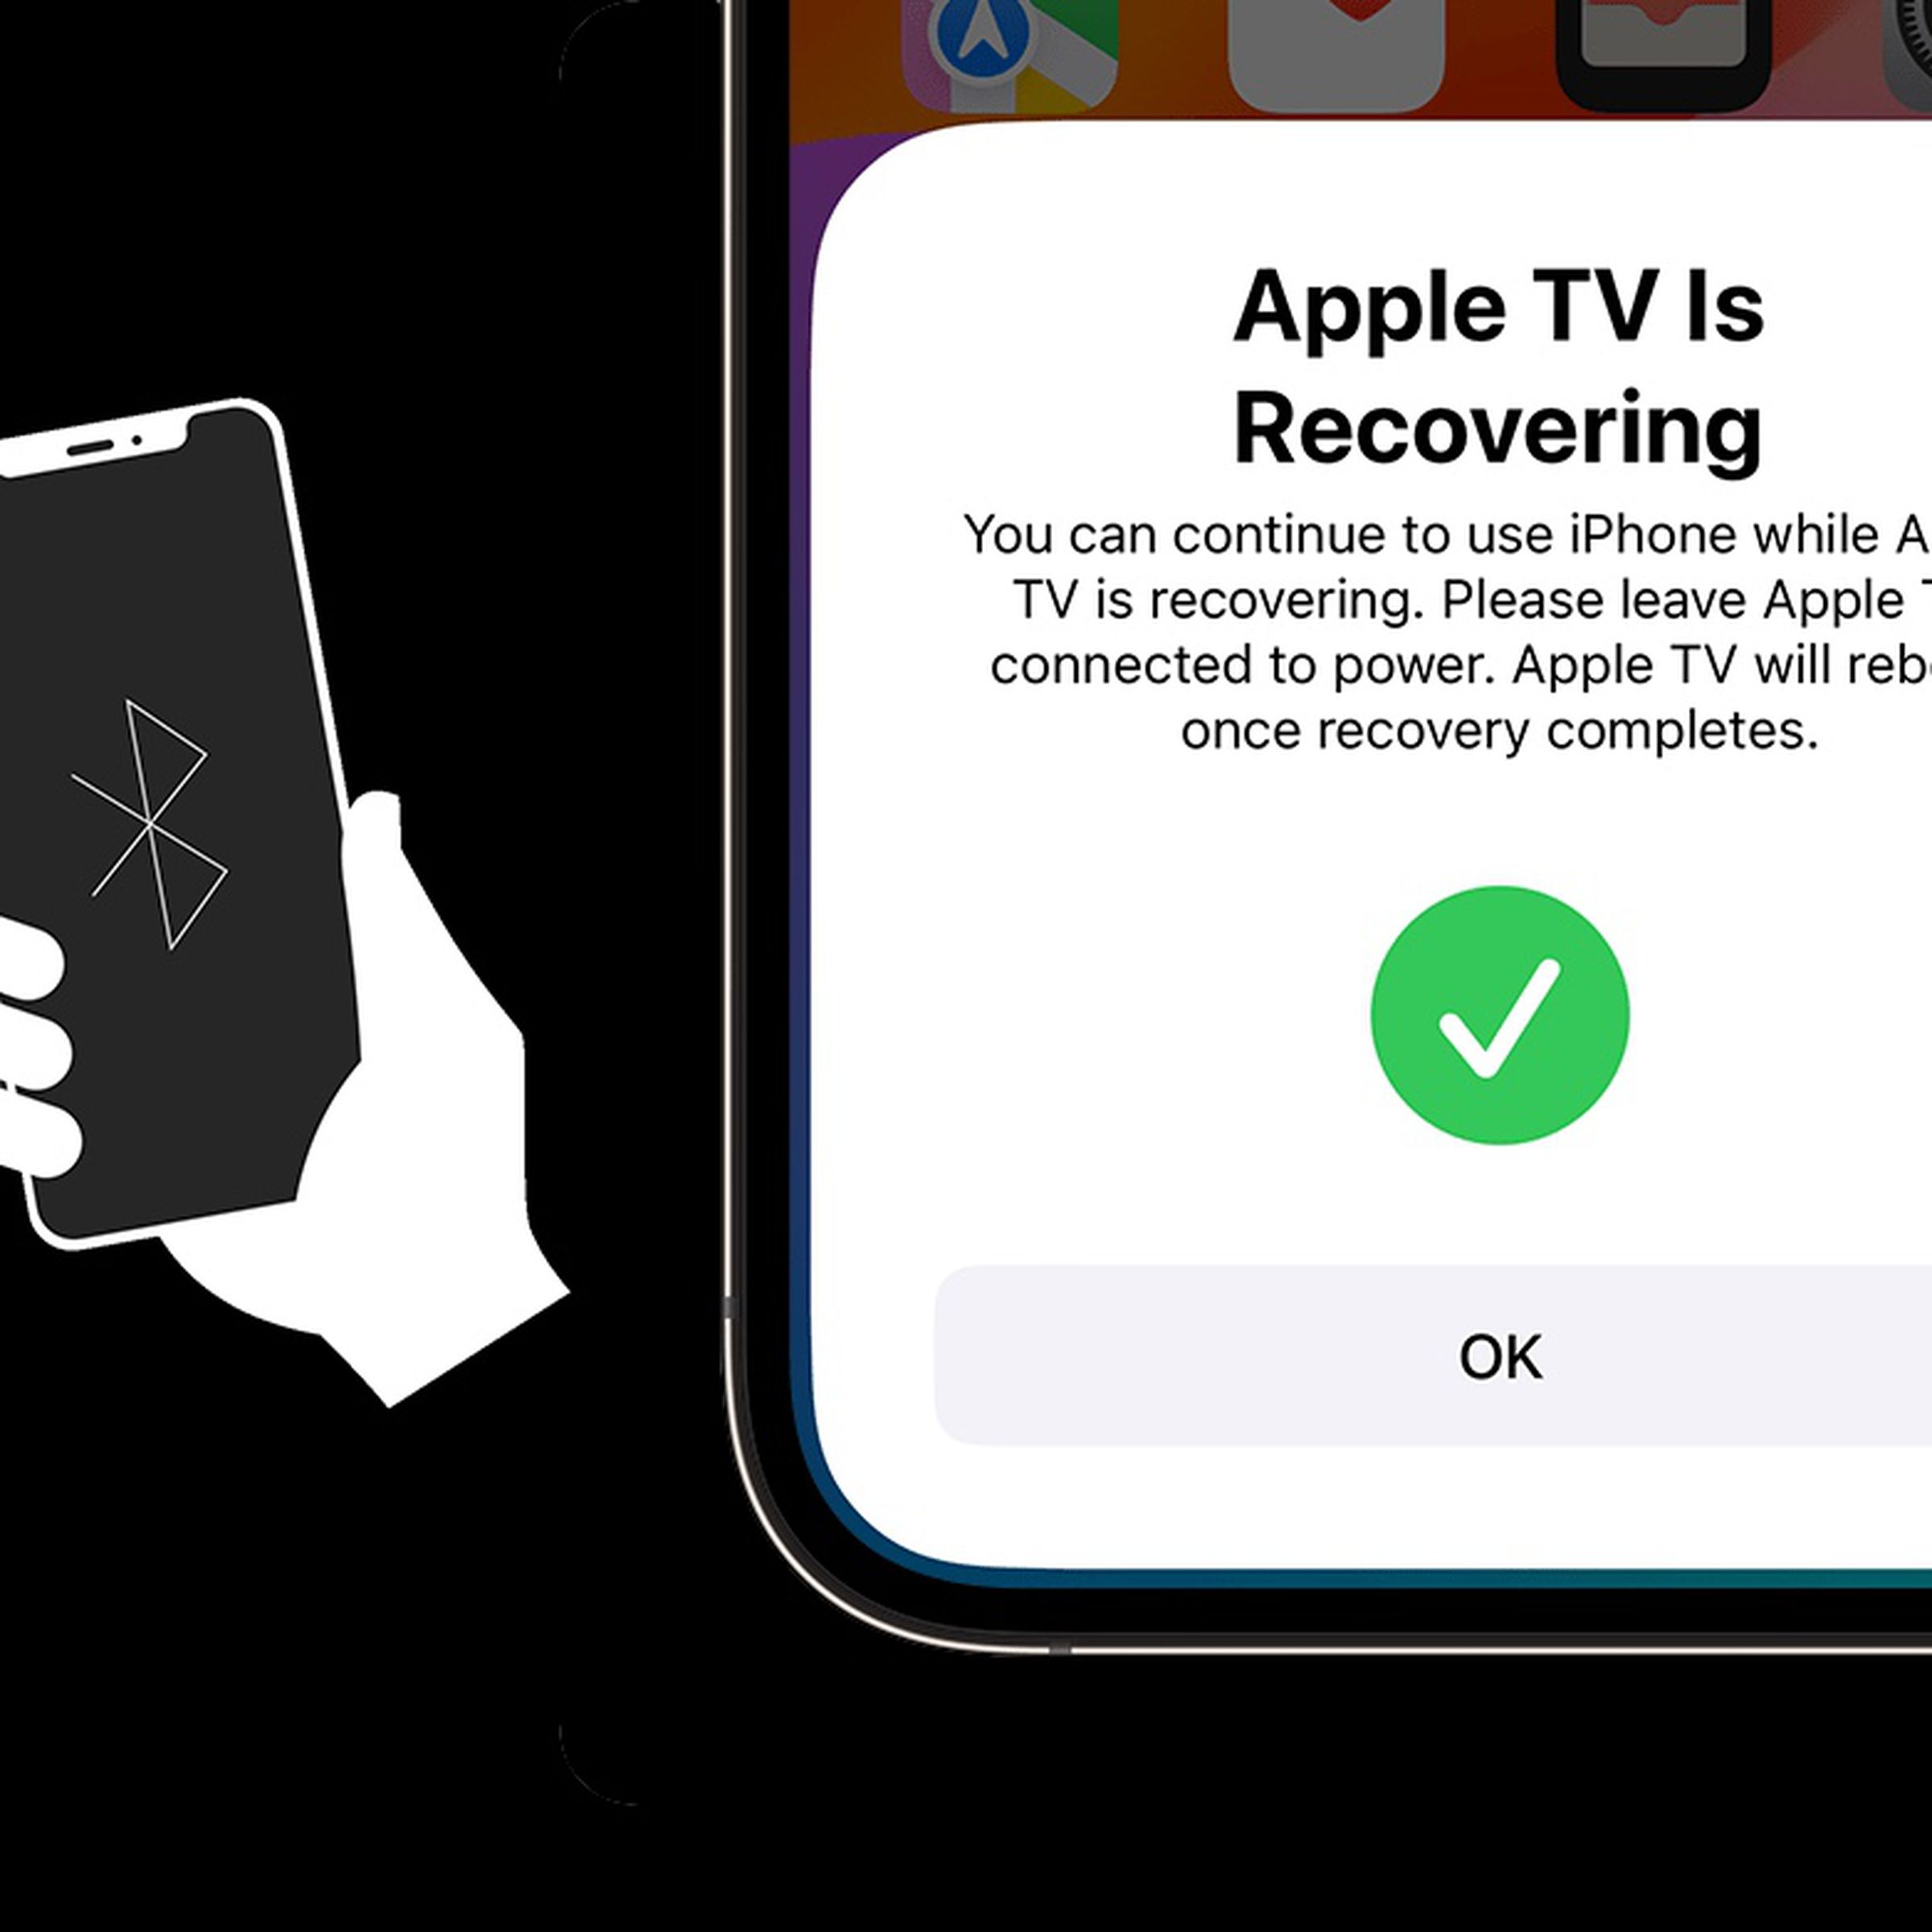 A screenshot of the new ability to restore an Apple TV using an iPhone.